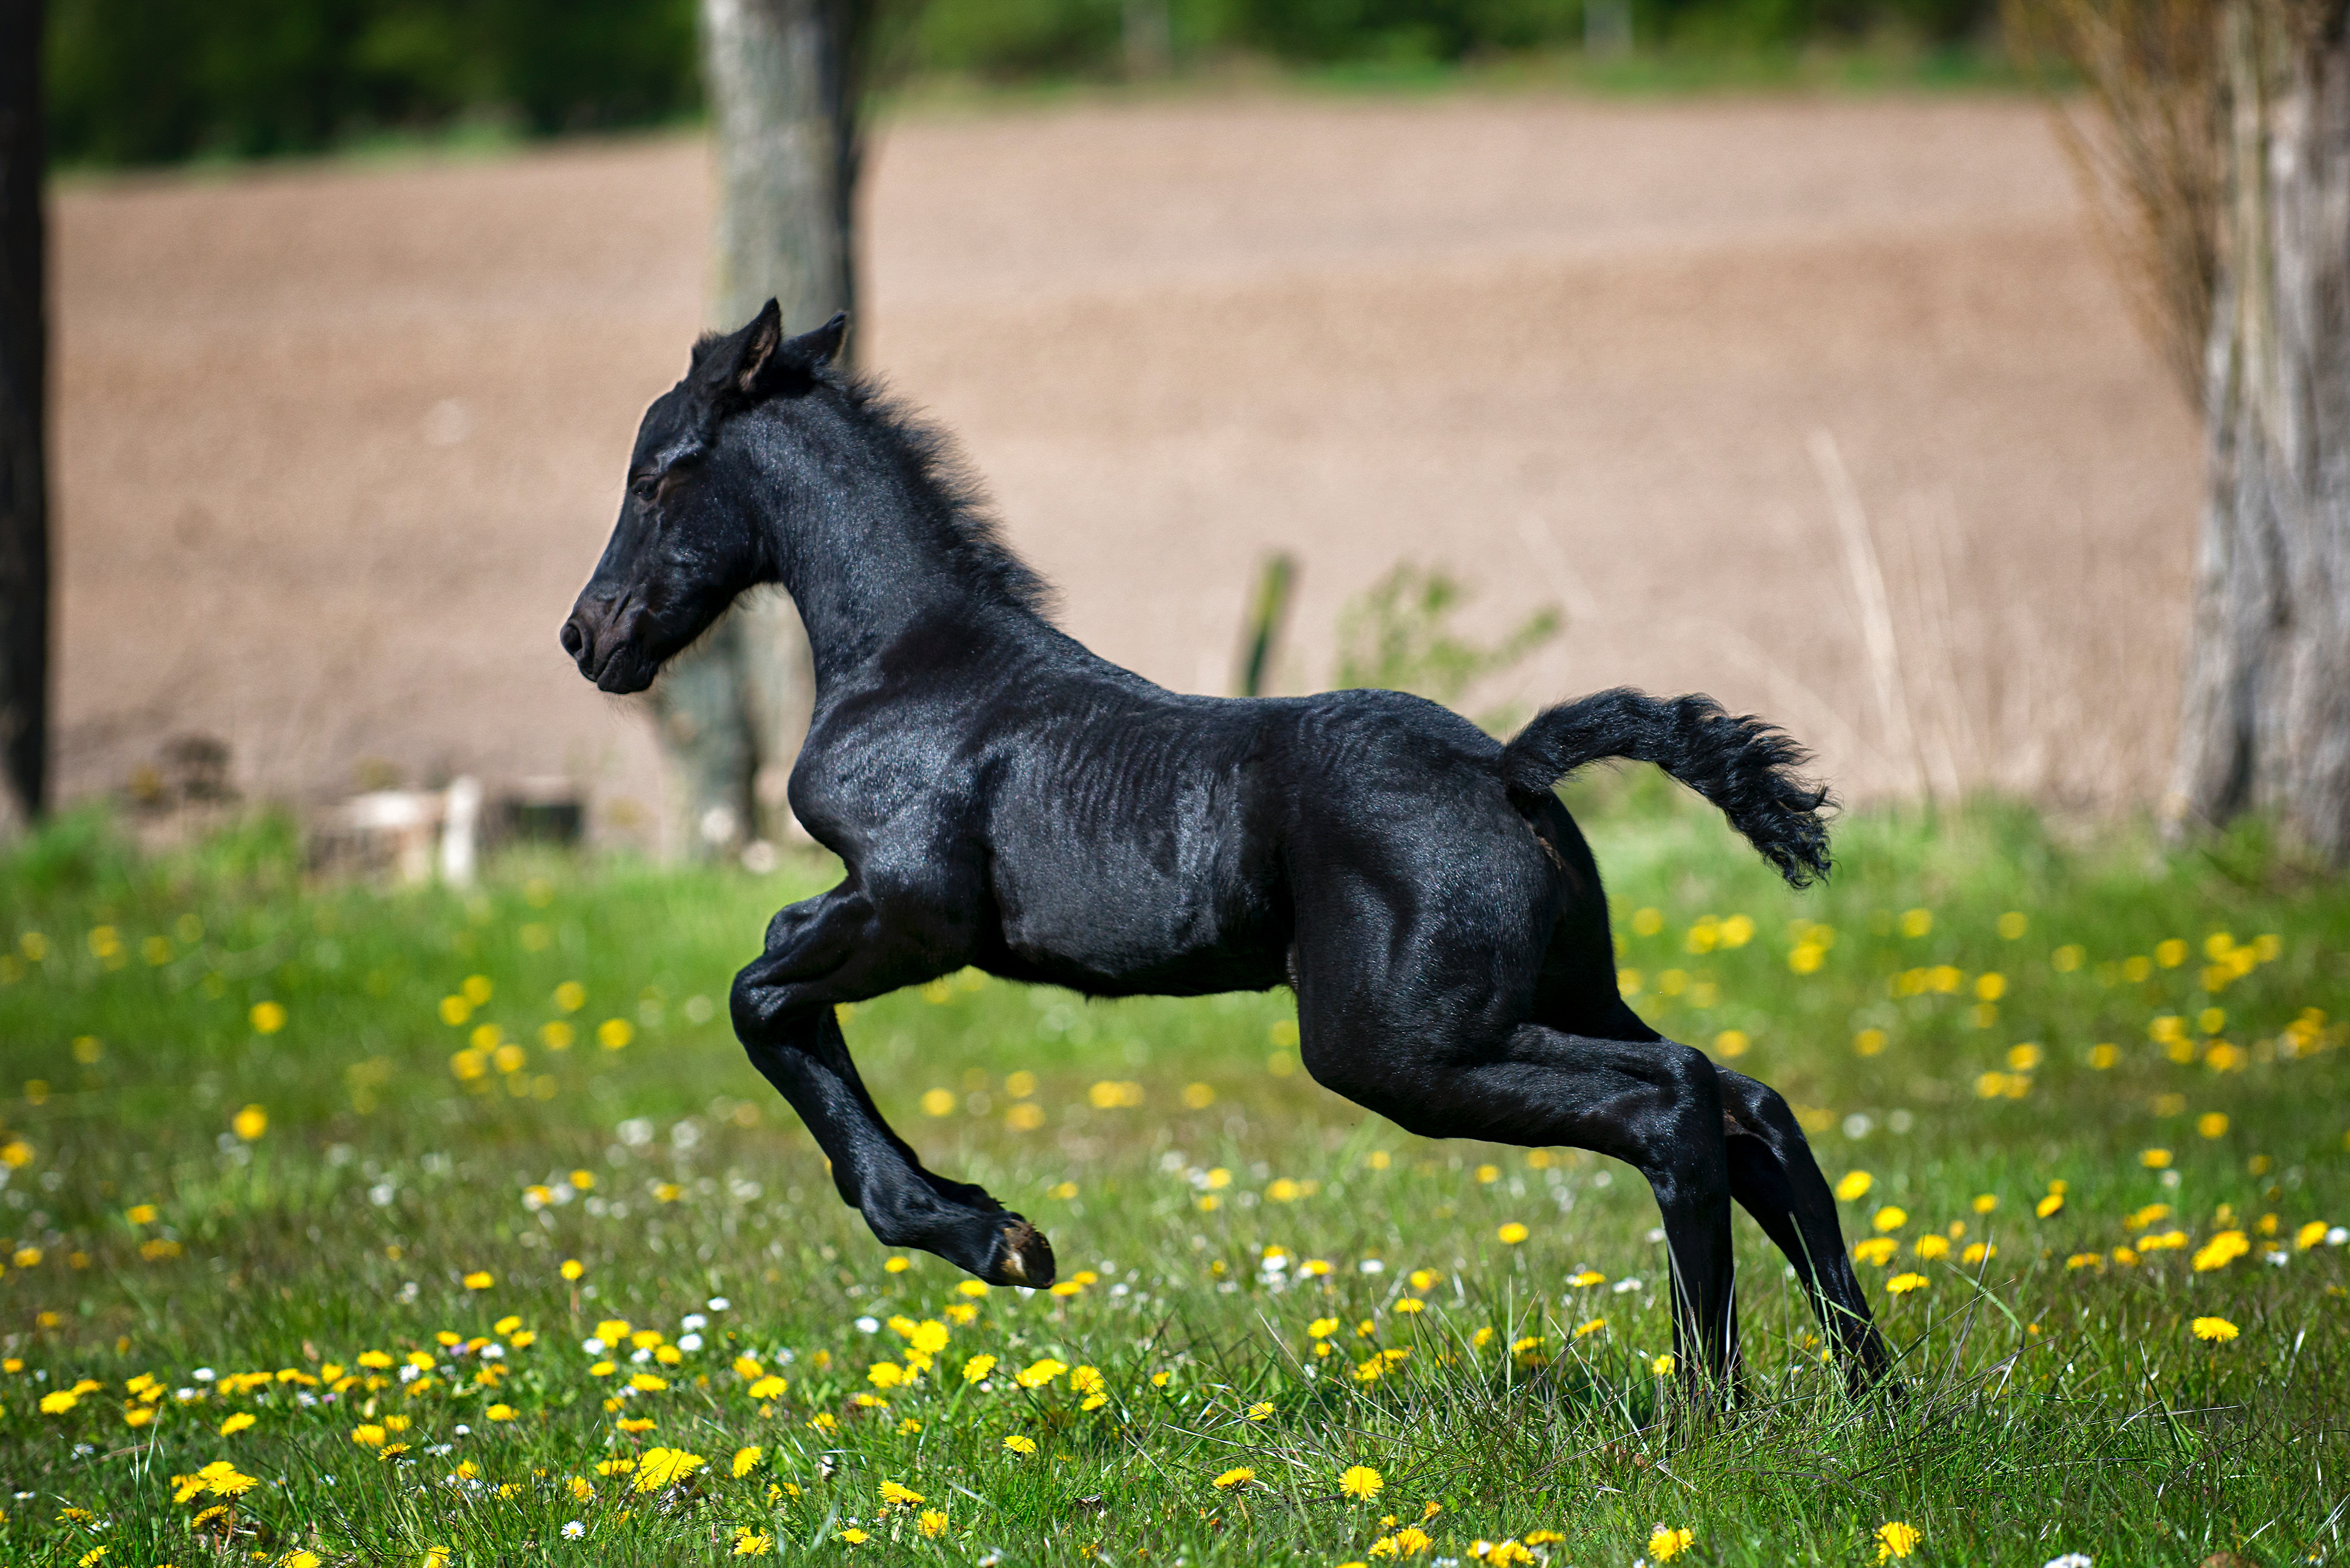 Black horse running on grass field with flowers photo